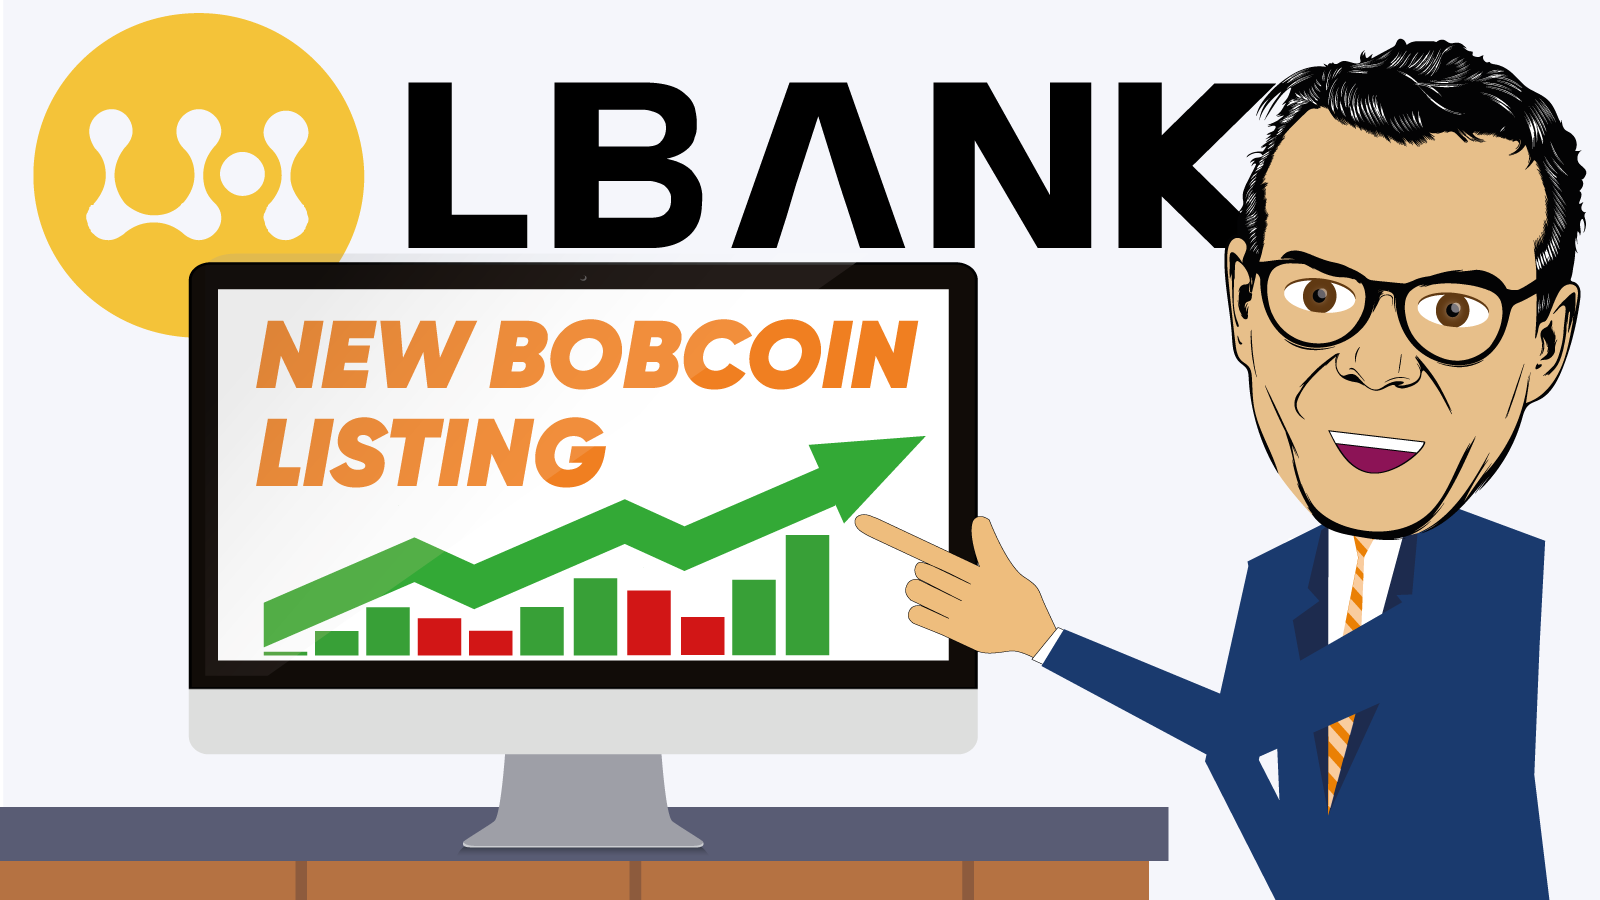 Breaking - Cryptocurrency Bobcoin, is now available on LBank!